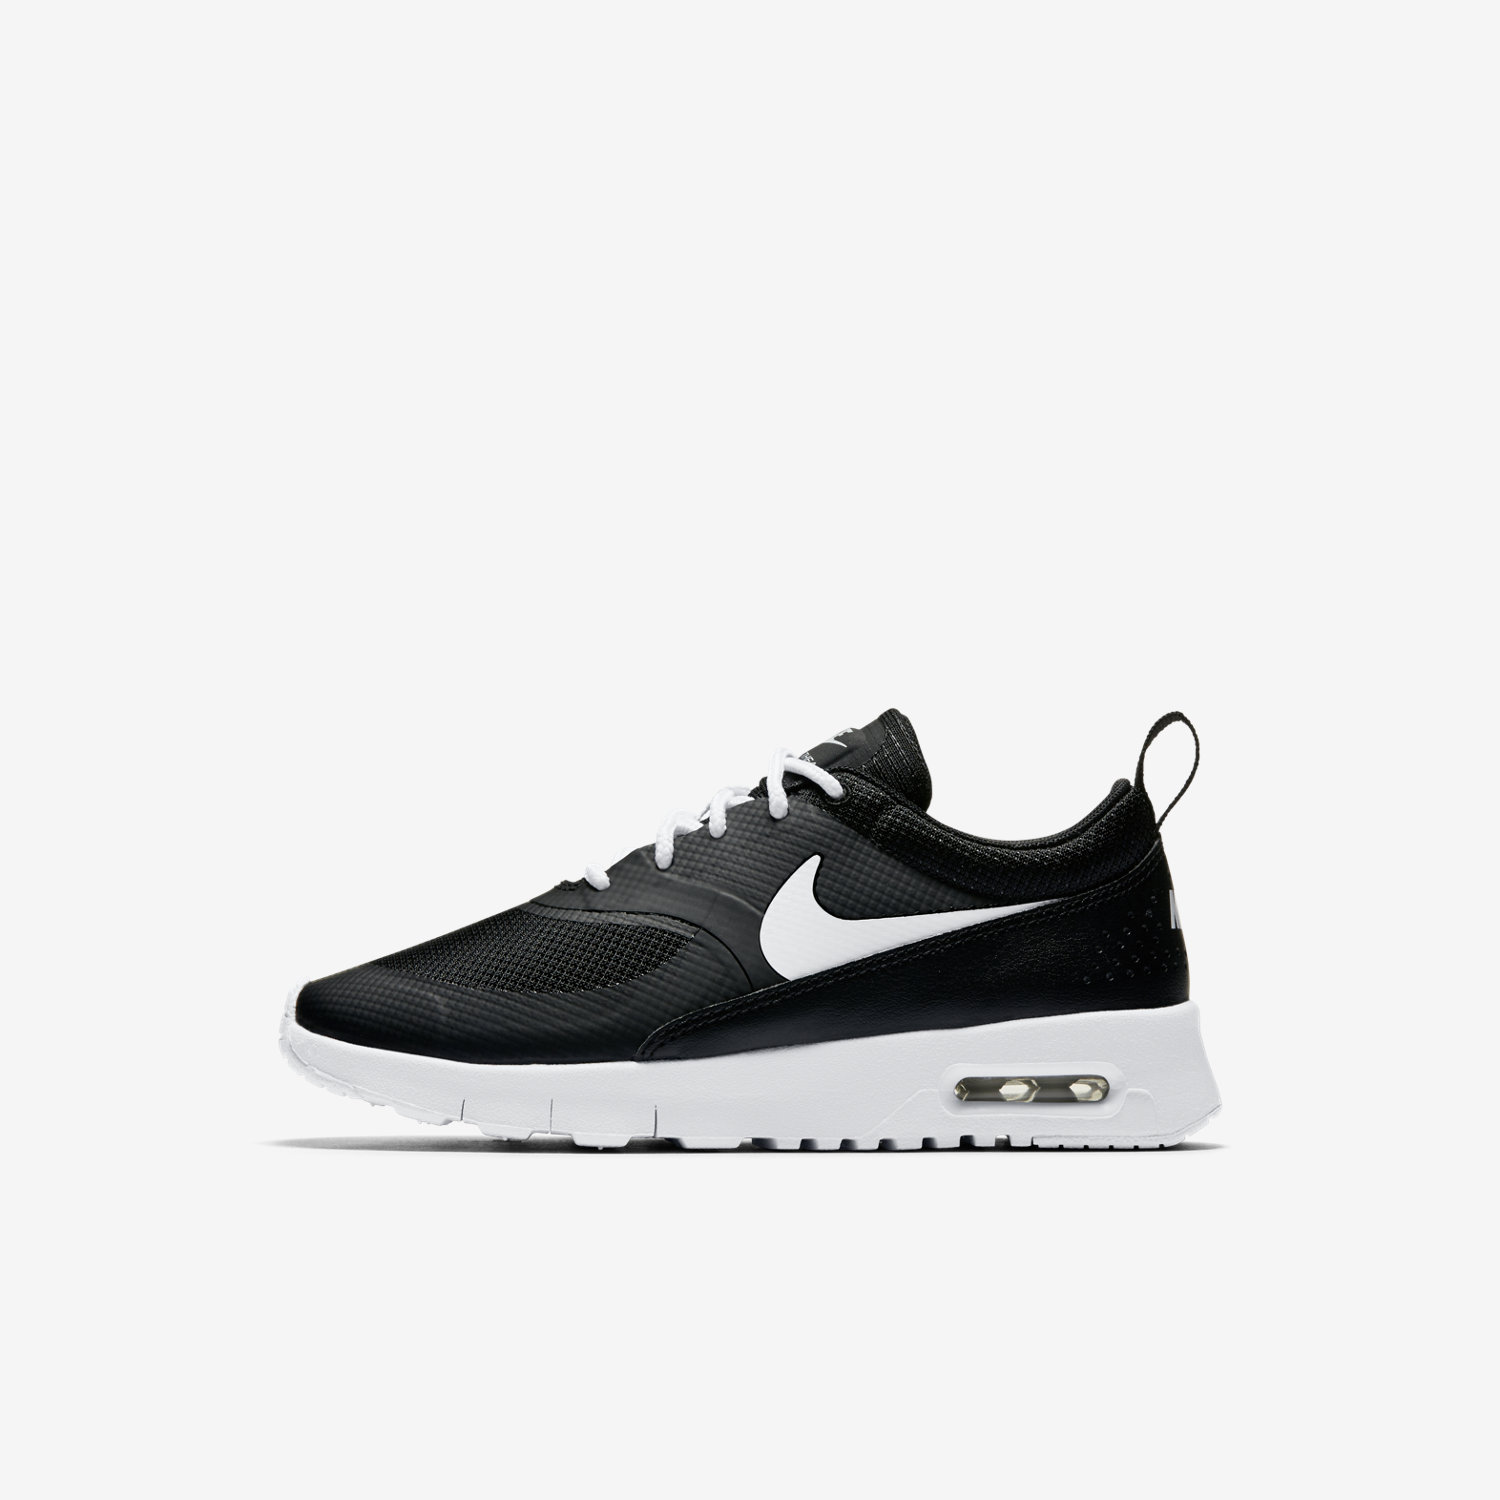 Nike Air Max Thea - Younger Kids' Shoe (10-2.5)